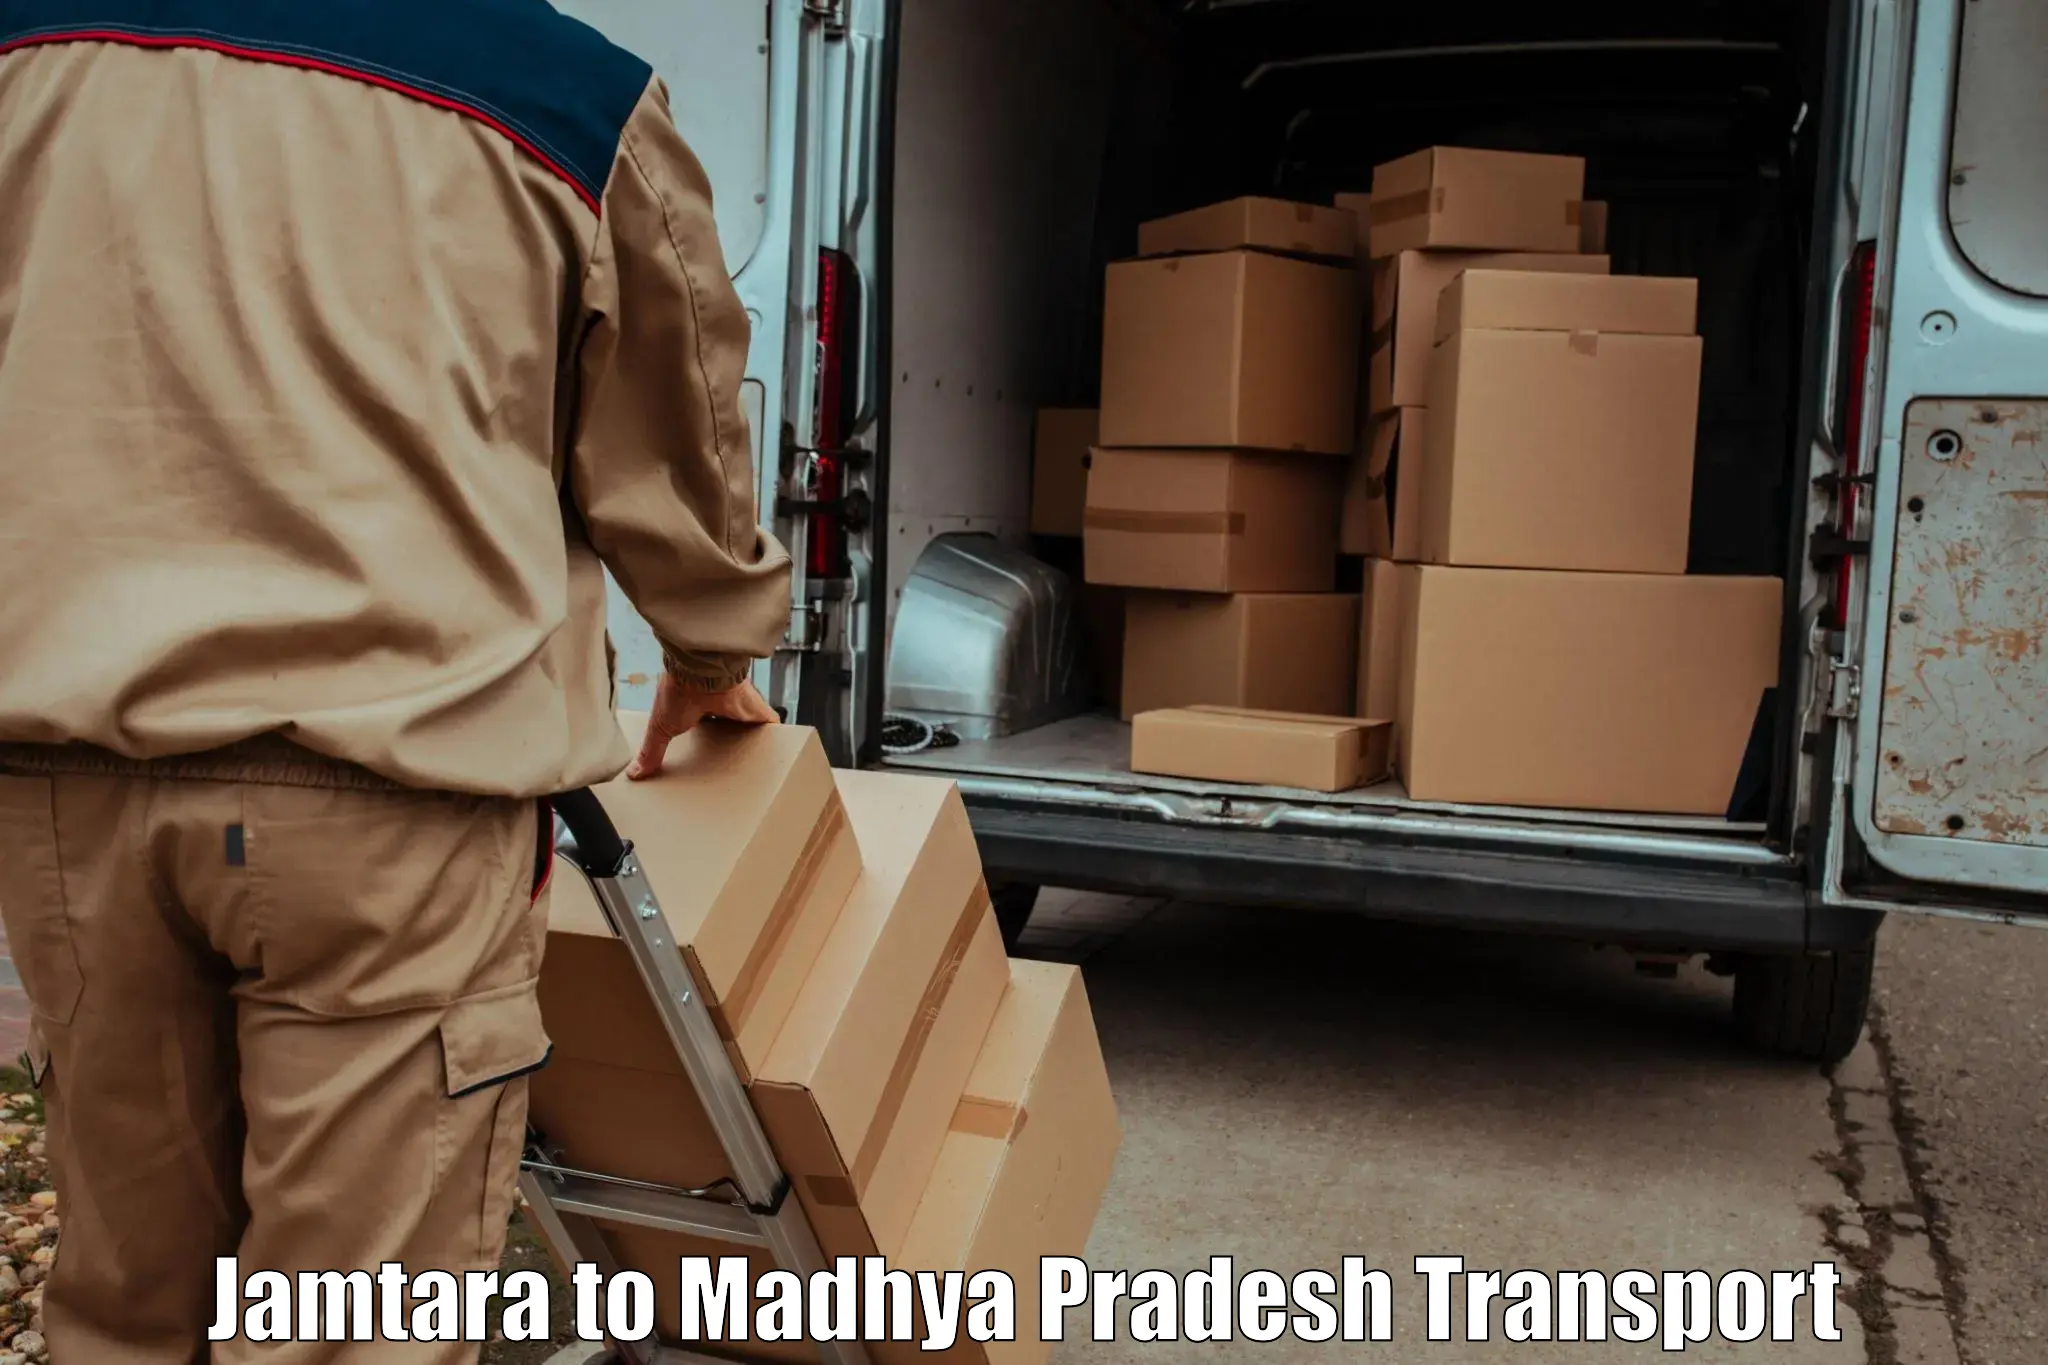 Goods delivery service Jamtara to Bhopal